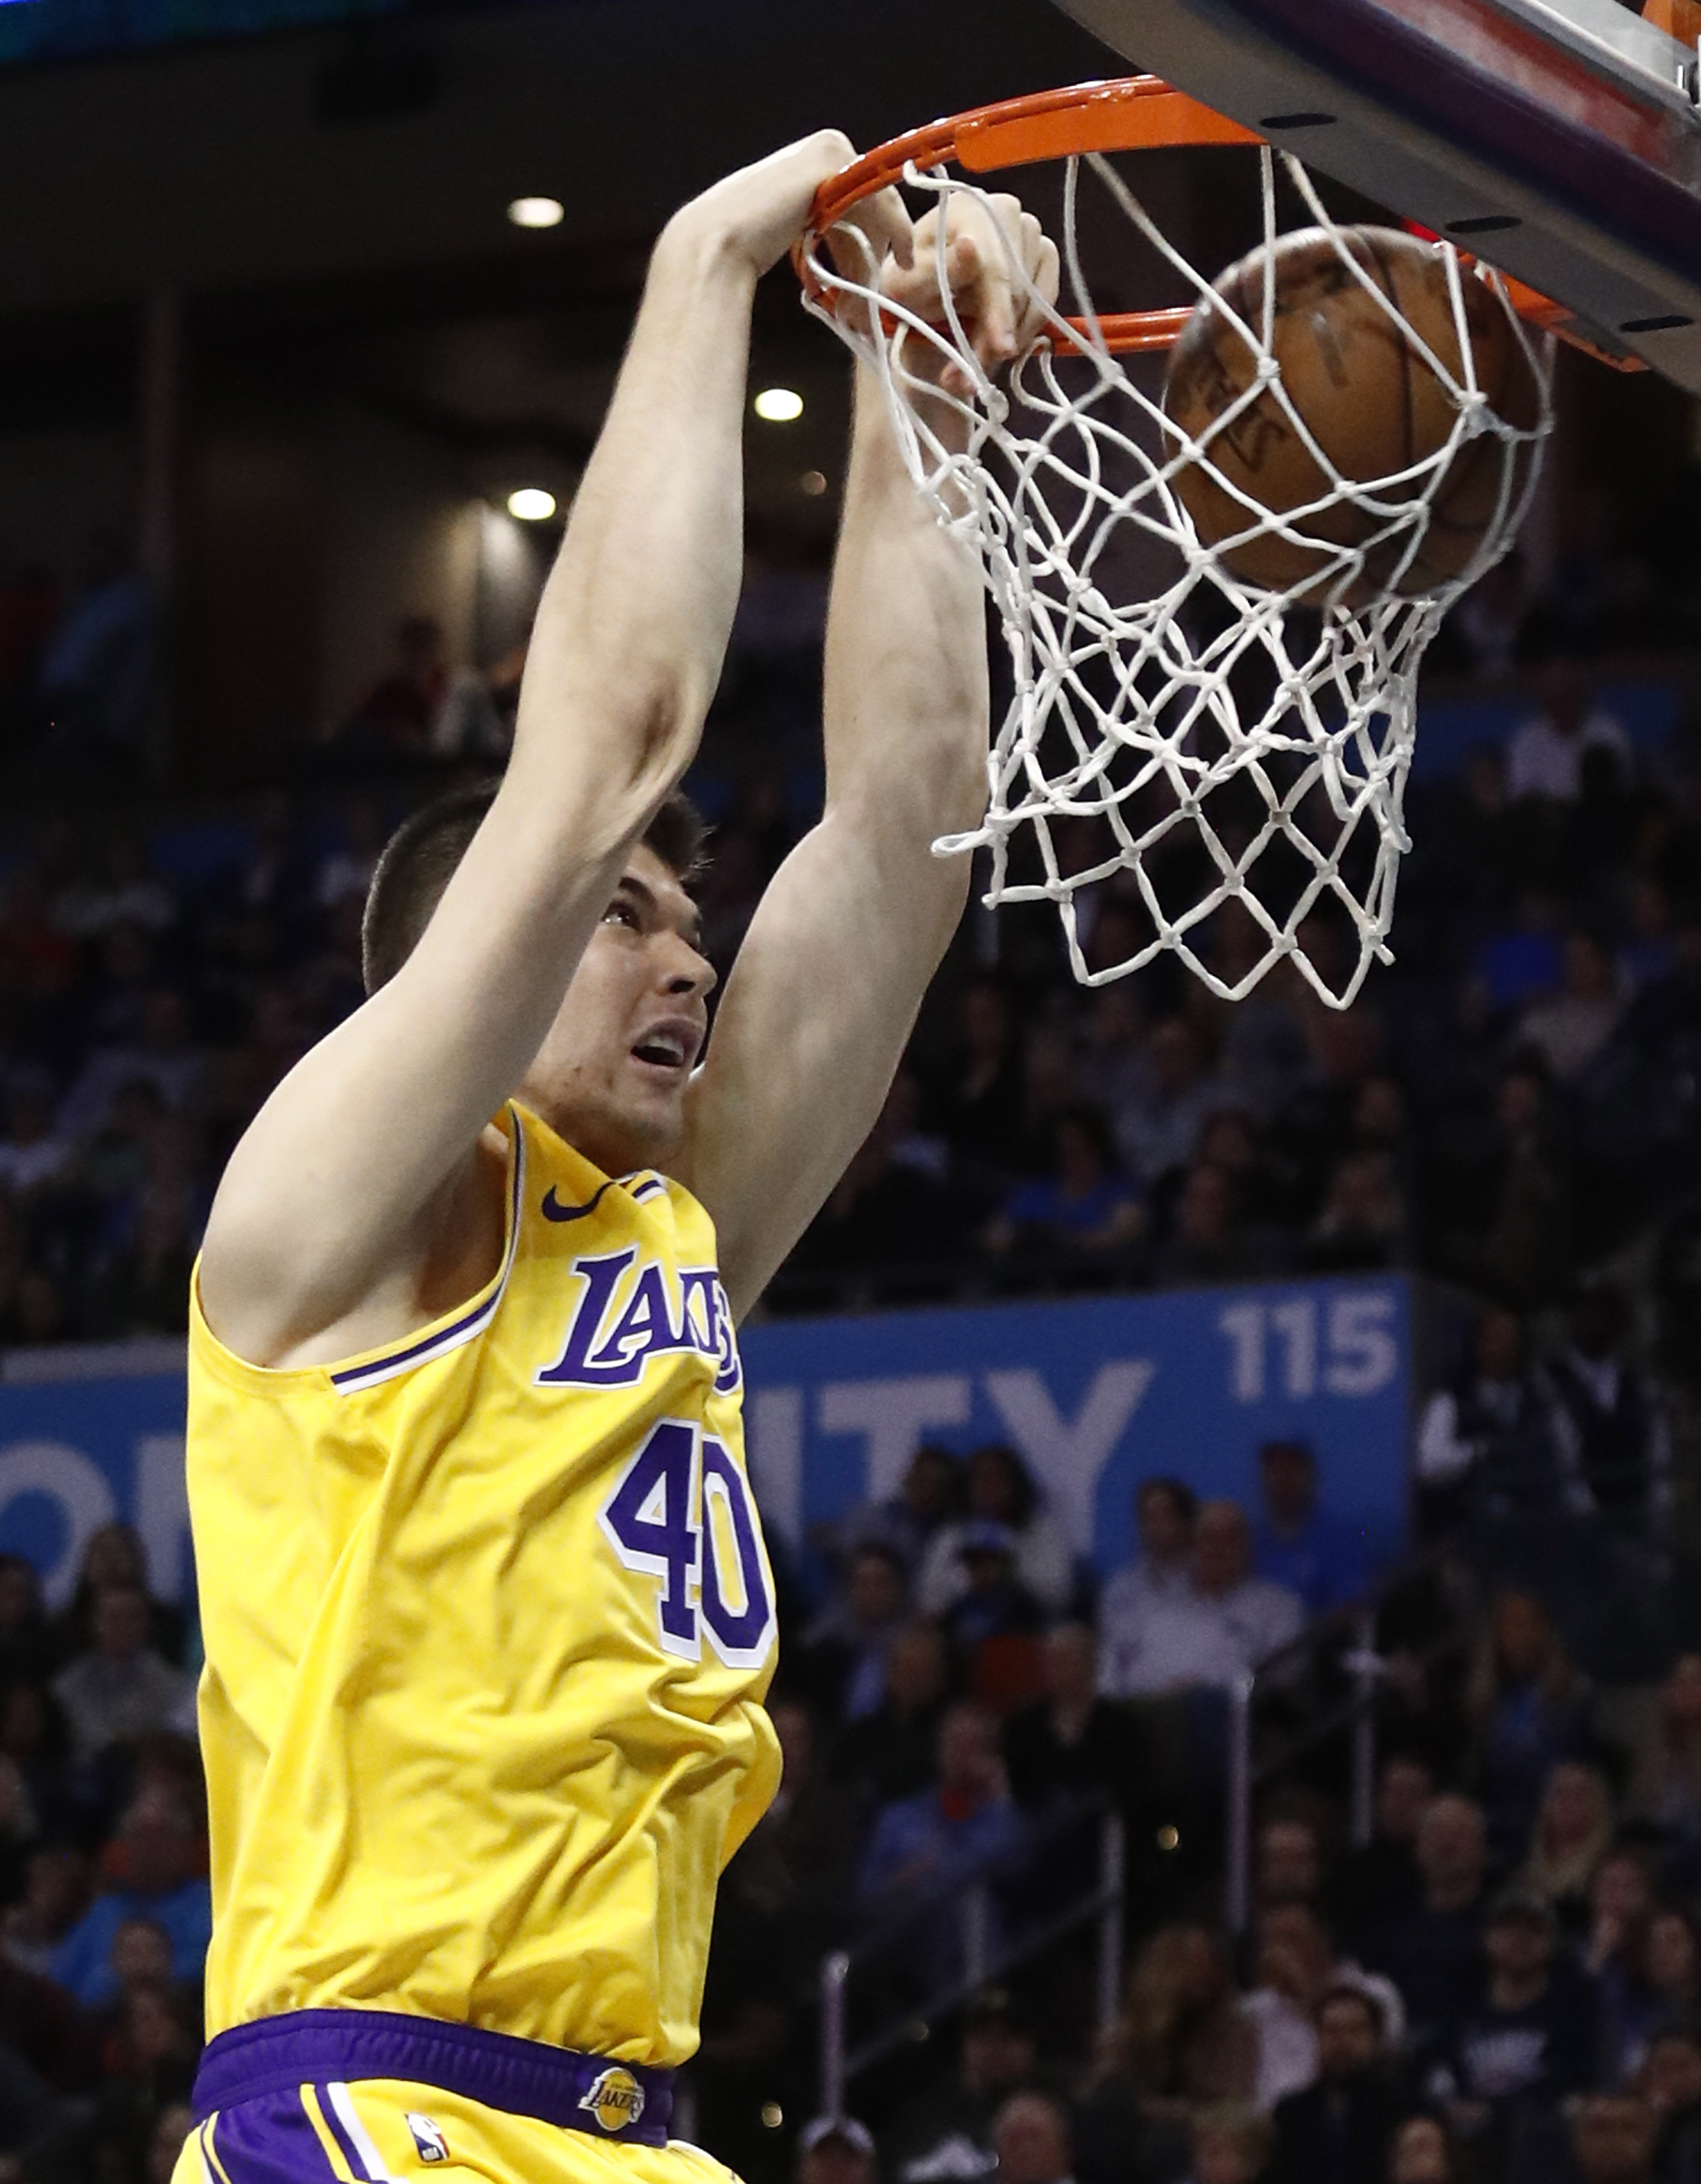 epa07295112 Los Angeles Lakers center Ivica Zubac of Croatia dunks the ball against the Oklahoma City Thunder in the second half of the NBA basketball game between the Los Angeles Lakers and the Oklahoma City Thunder Basketball at Chesapeake Energy Arena in Oklahoma City, Oklahoma, USA, 17 January 2019.  EPA/LARRY W. SMITH SHUTTERSTOCK OUT